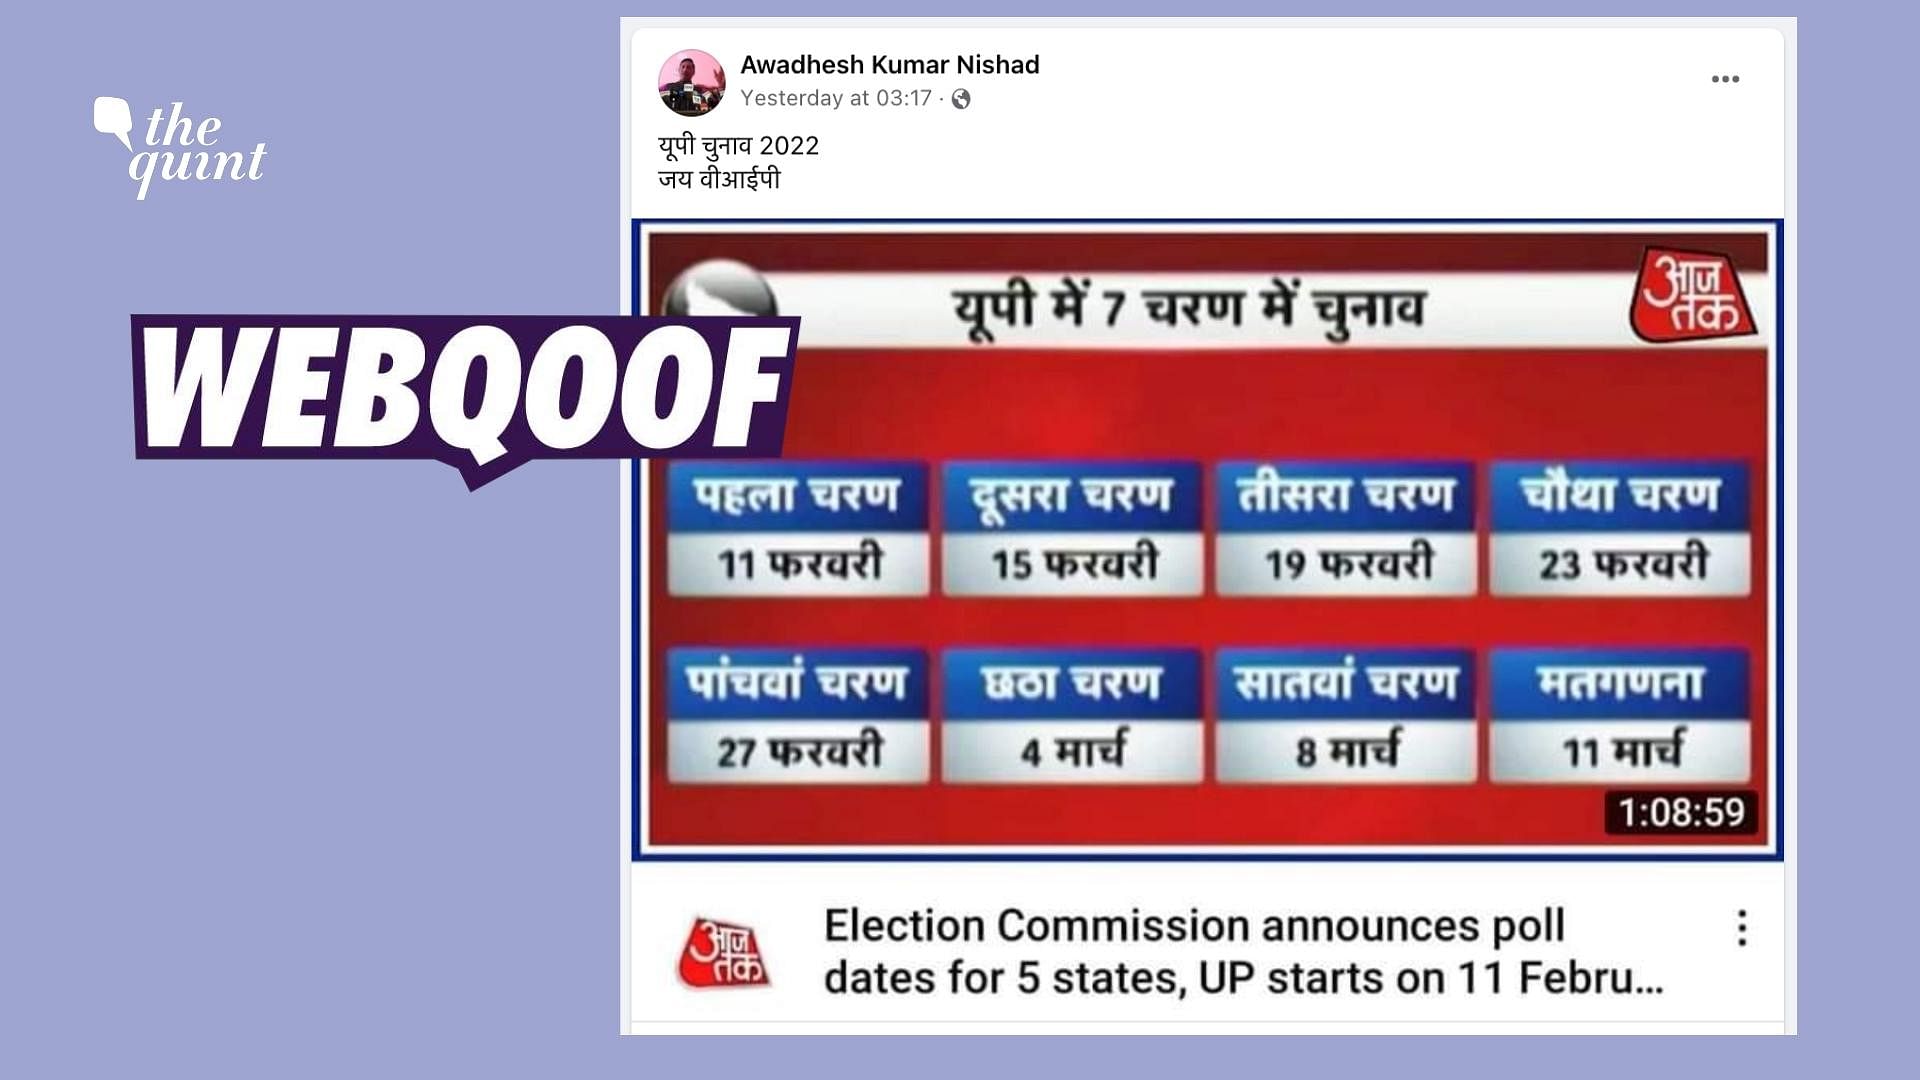 <div class="paragraphs"><p>The claim states that the dates of the 2022 Uttar Pradesh elections have been announced.</p></div>